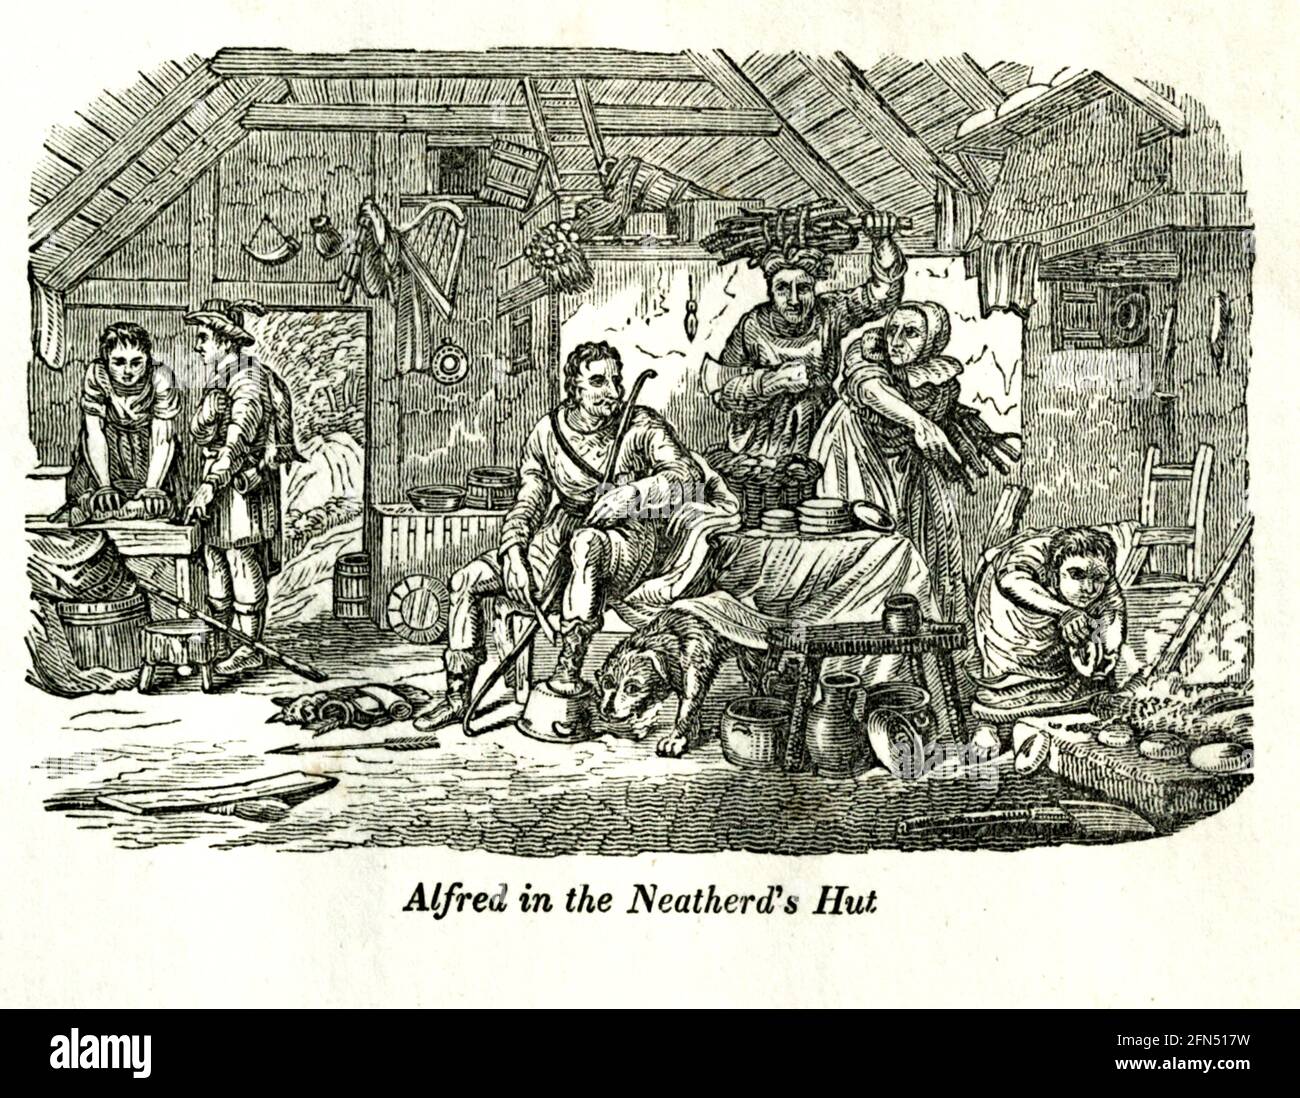 Alfred in the Neatherd's hut from the book History of England : with separate historical sketches of Scotland, Wales, and Ireland; from the invasion of Julius Cæsar until the accession of Queen Victoria to the British throne. By Russell, John, A. M., Published in Philadelphia by Hogan & Thompso in 1844 Stock Photo